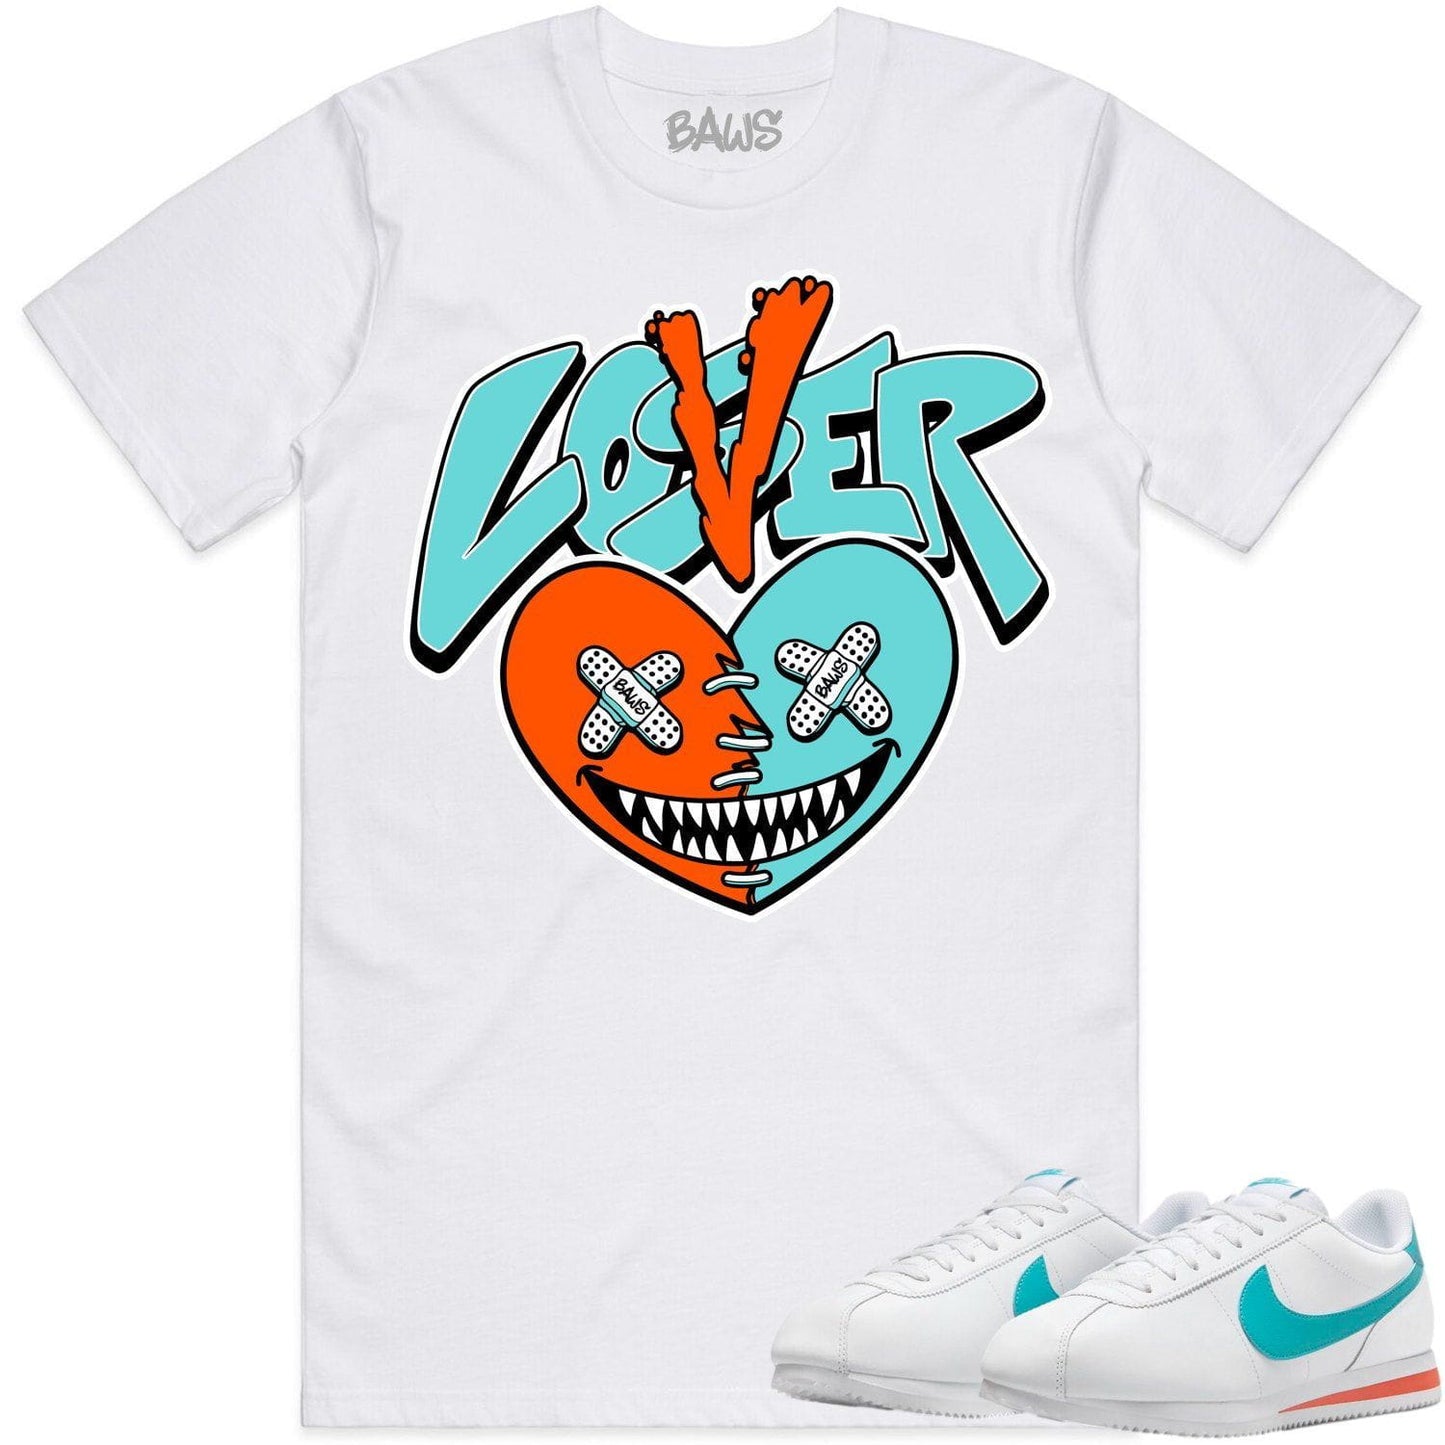 Miami Cortez Dolphins Shirt - Dolphins Sneaker Tees - Lover Loser Baws